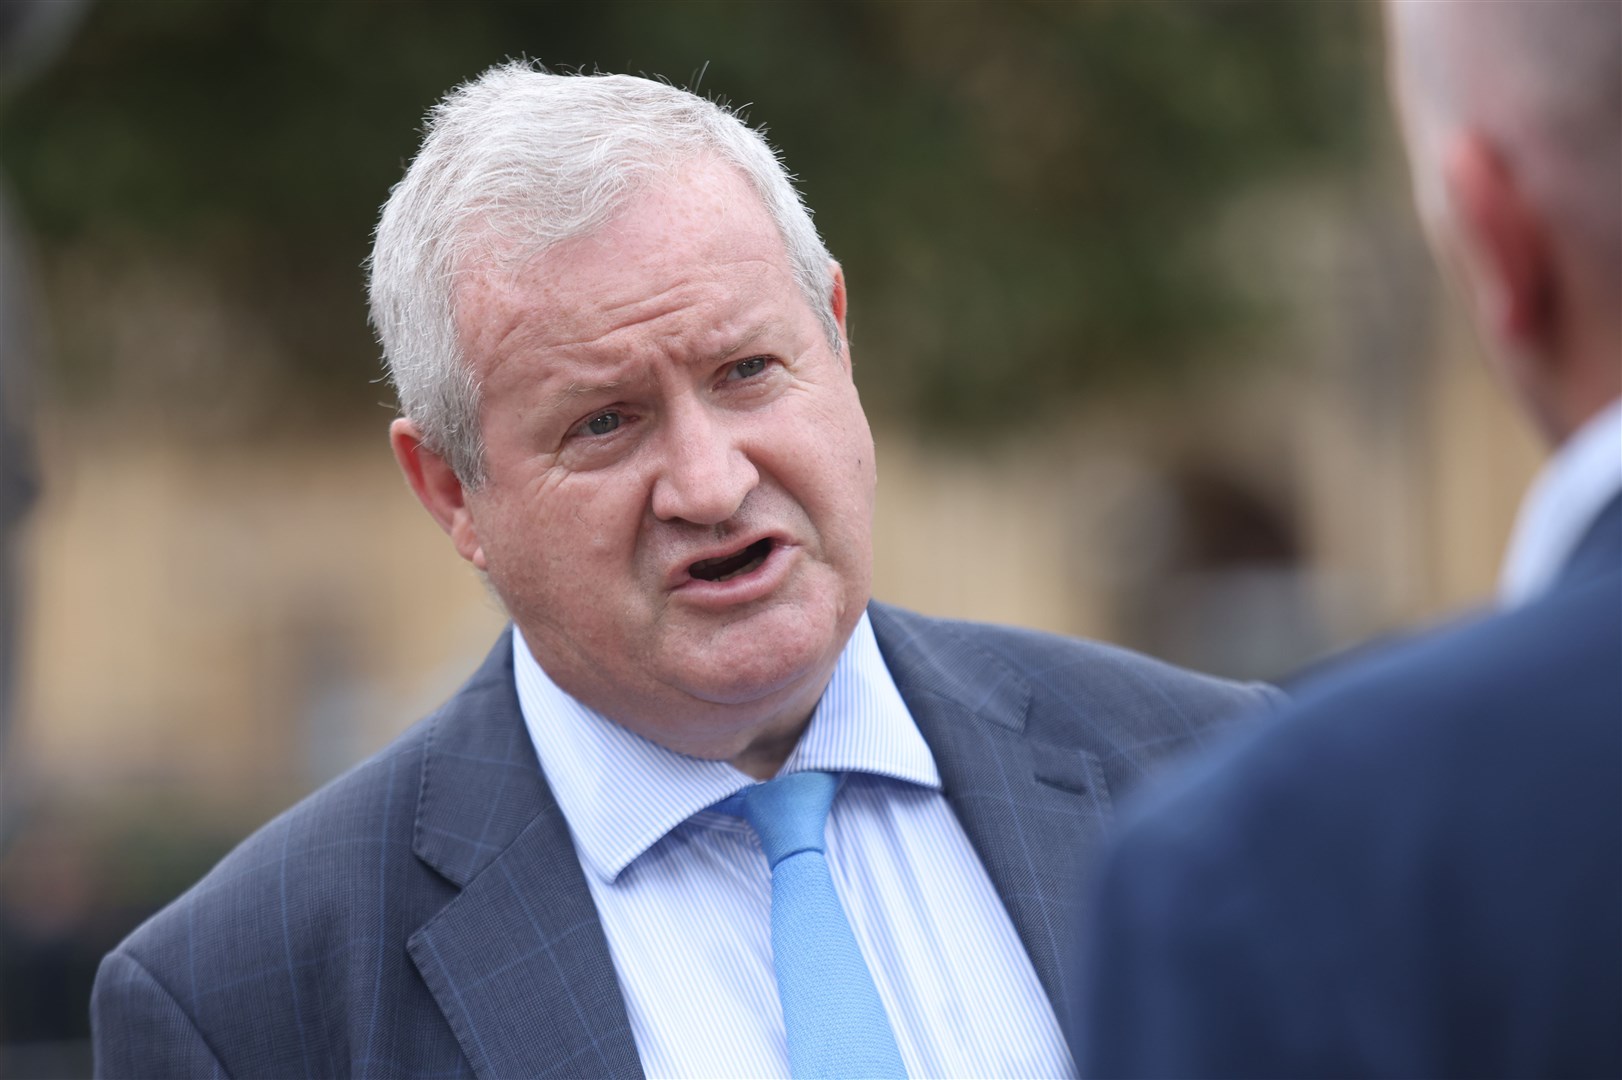 SNP Westminster leader Ian Blackford called for a general election (James Manning/PA)